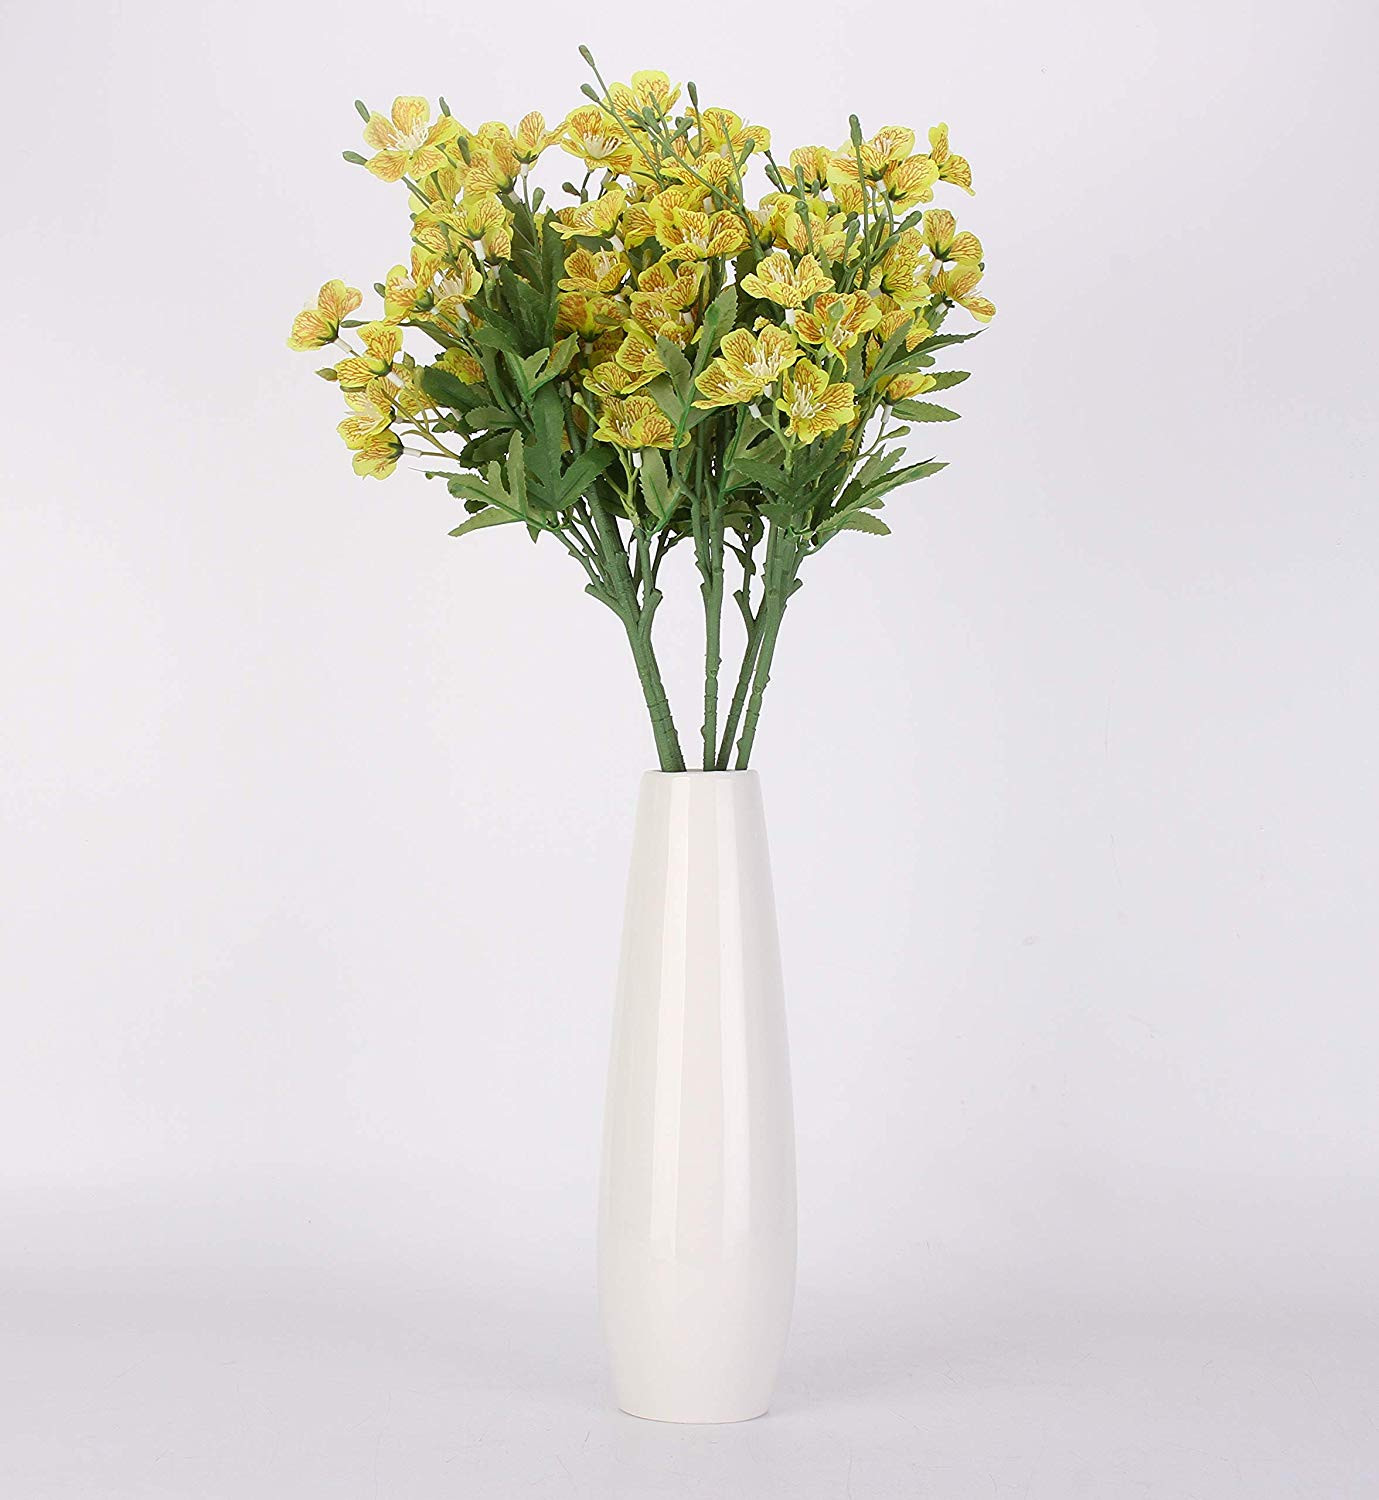 28 Perfect Artificial Flowers In Vase Yellow | Decorative vase Ideas